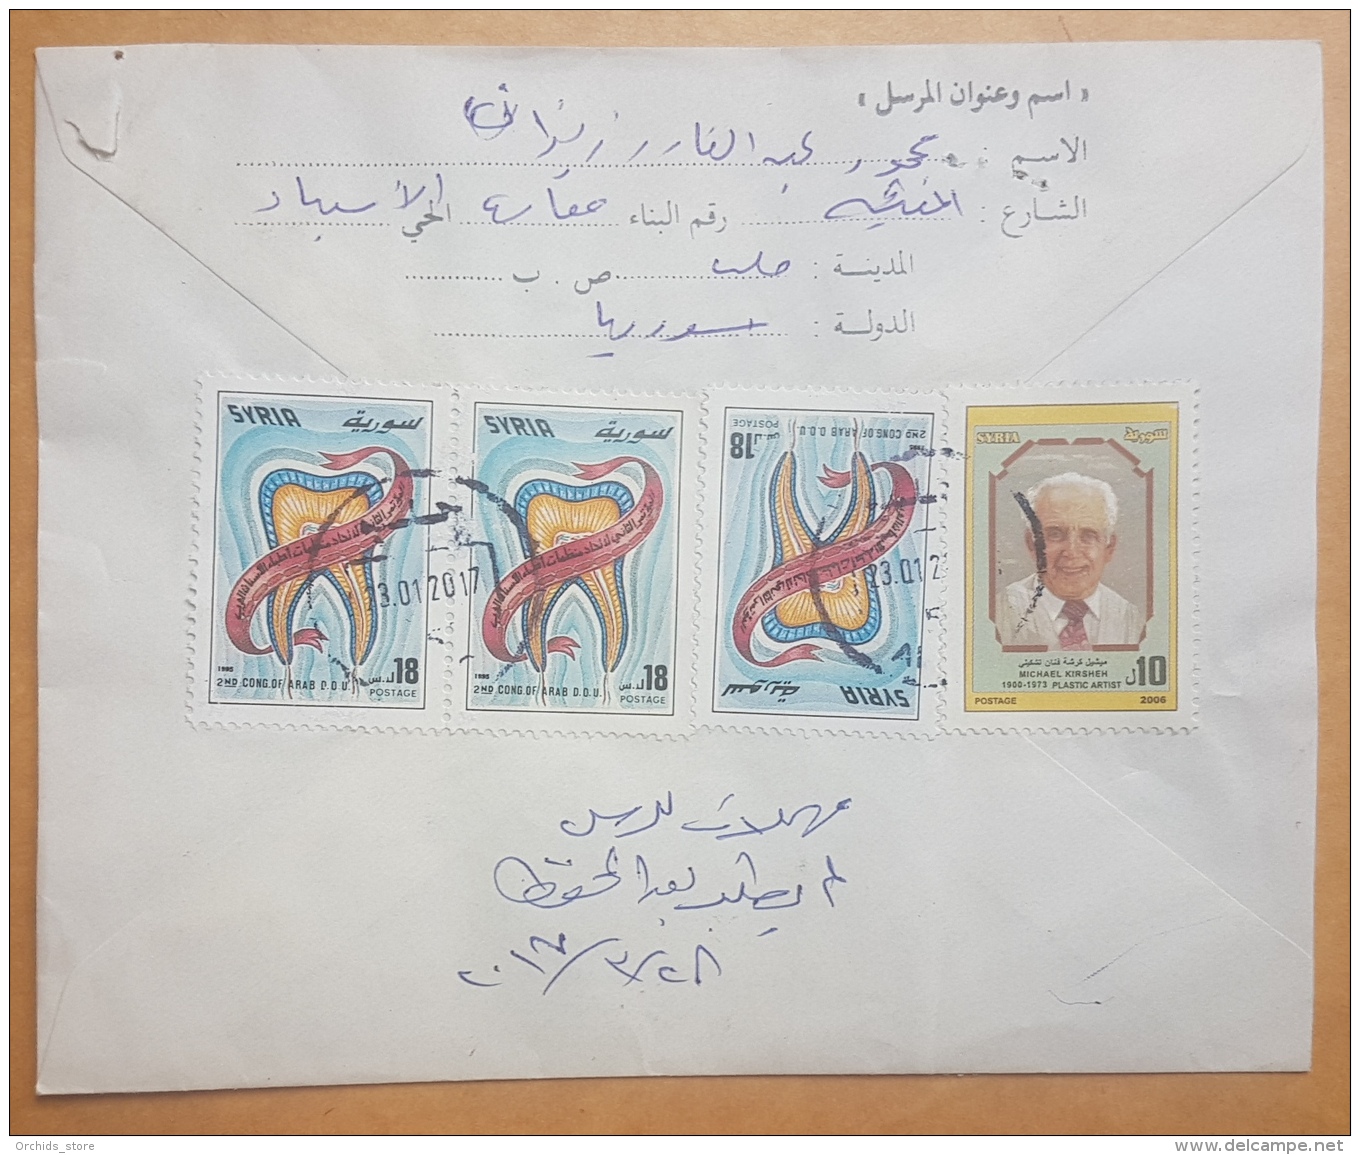 Syria 23.1.2017 CIVIL WAR Period Cover Registered From ALEPPO, Franked Dentist's 18Lx8 + 10L Kirsheh = 154L, Undelivered - Syria